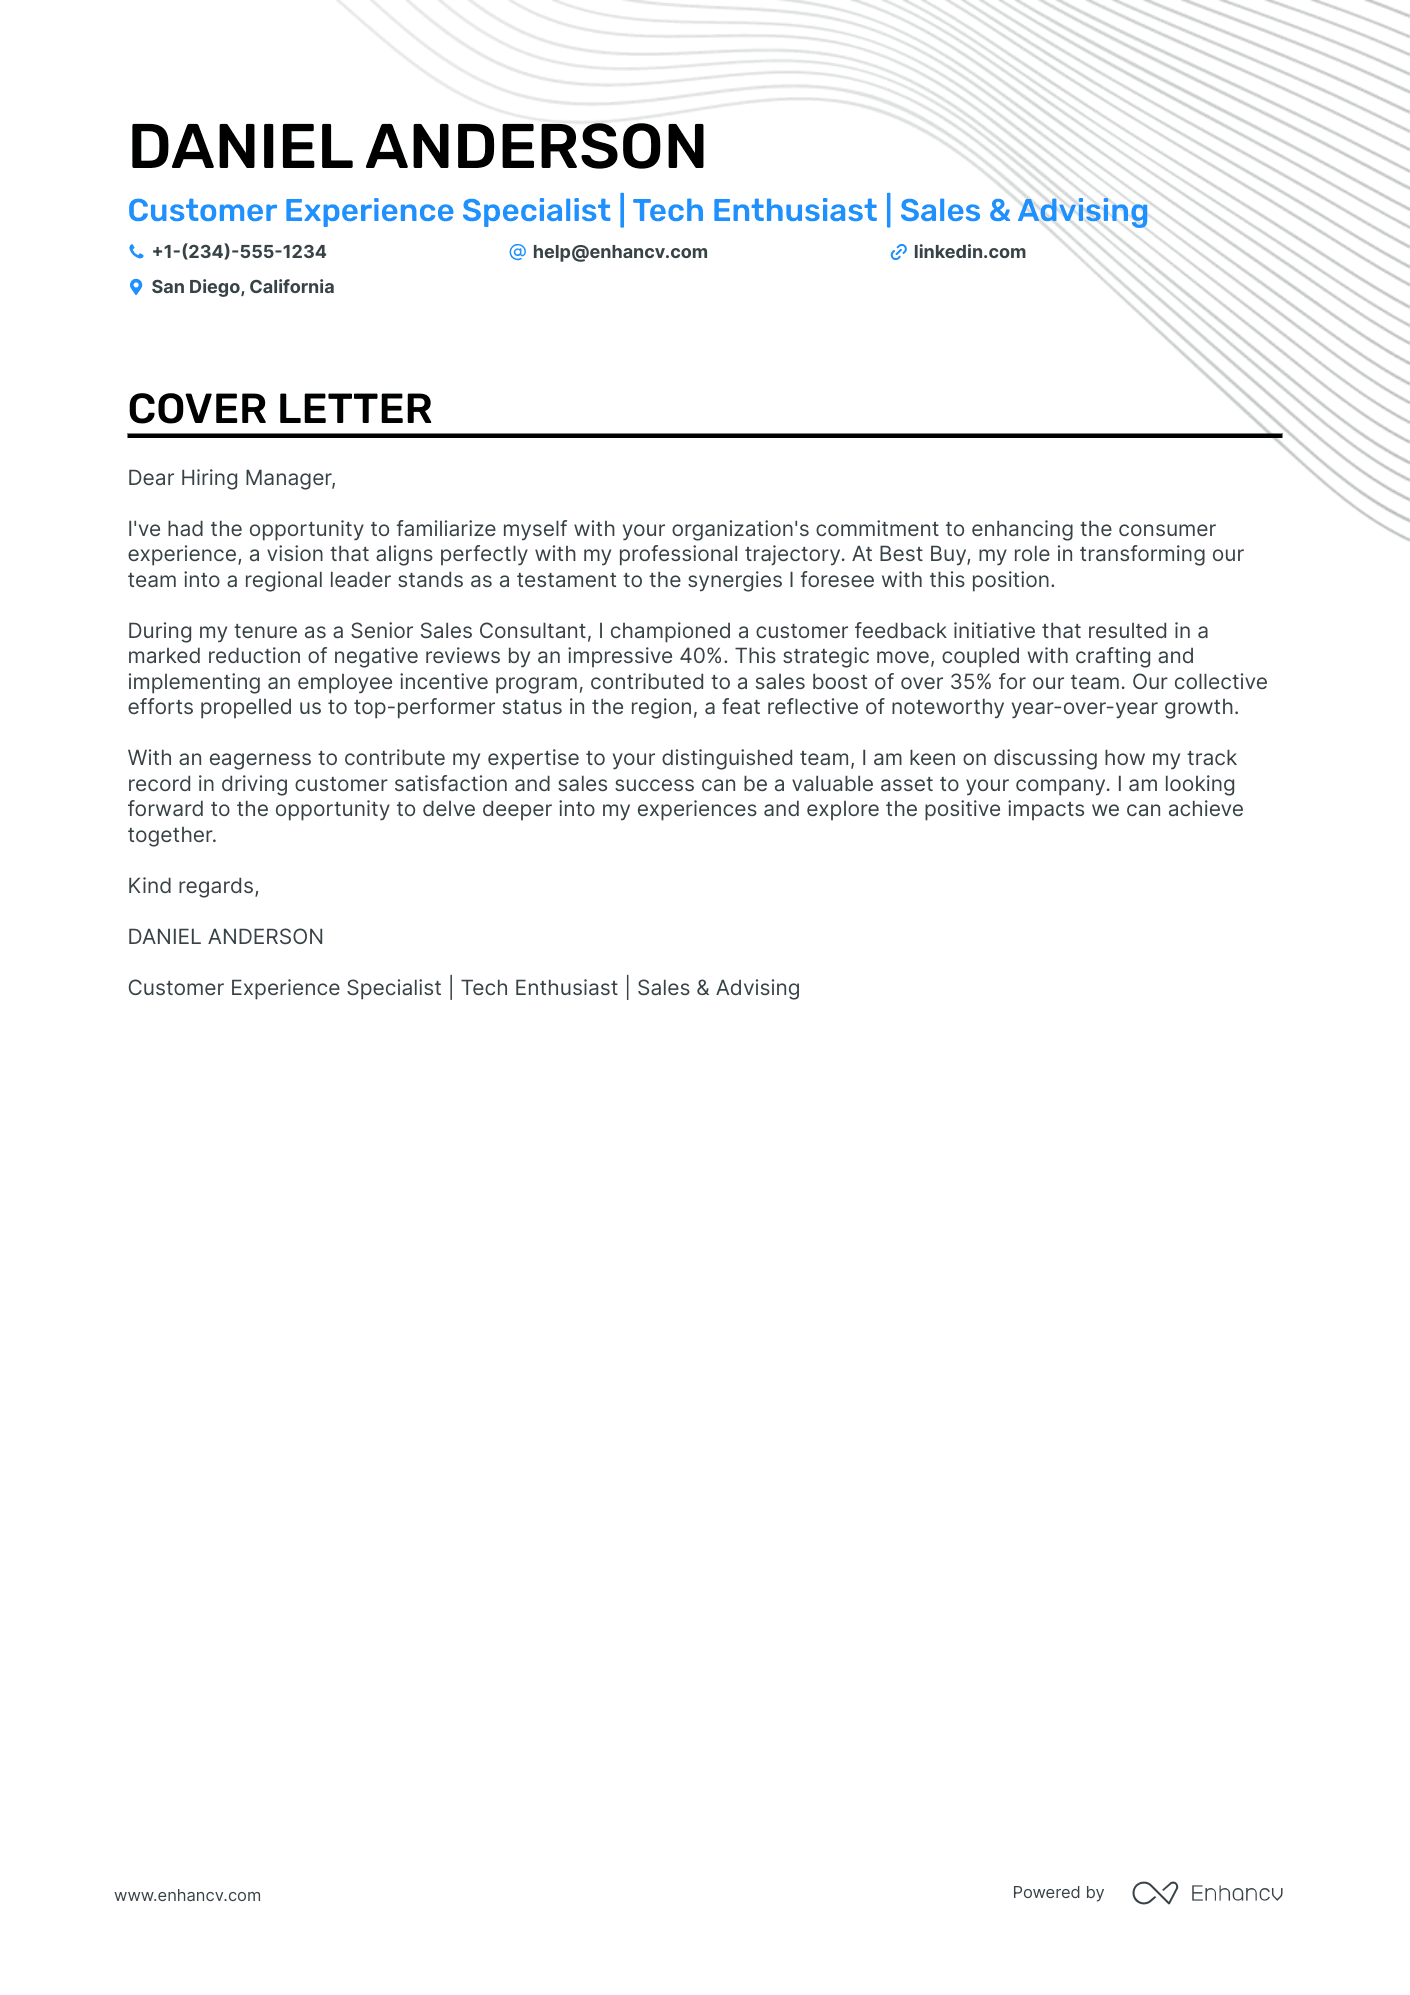 Apple Retail cover letter